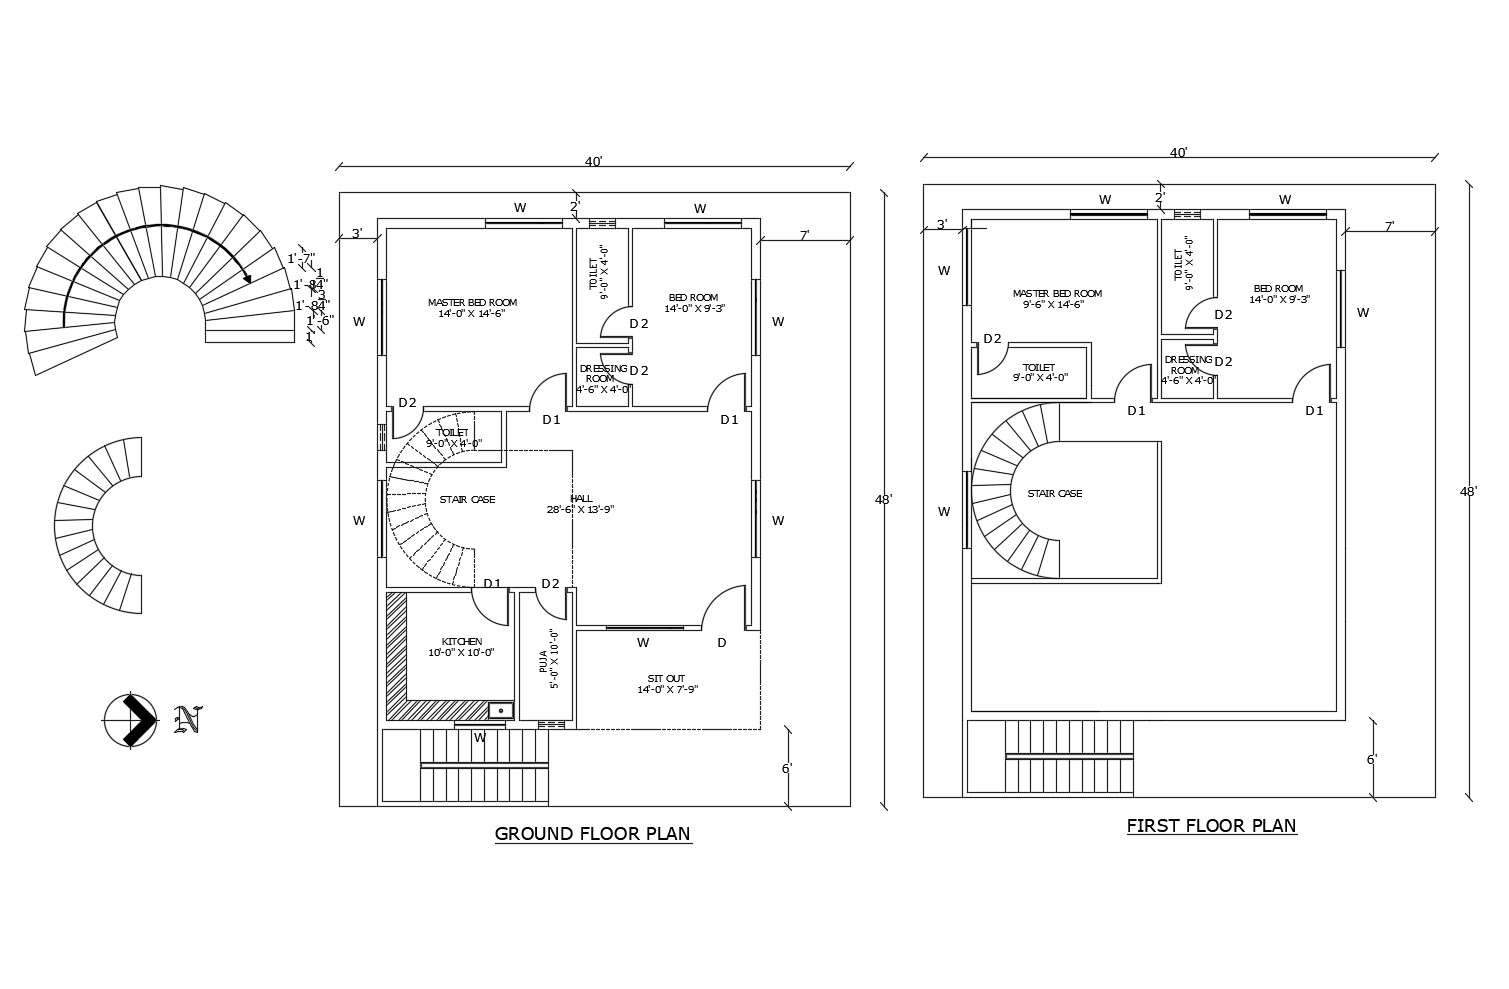 Floor plan of residential house 40' x 48' with detail